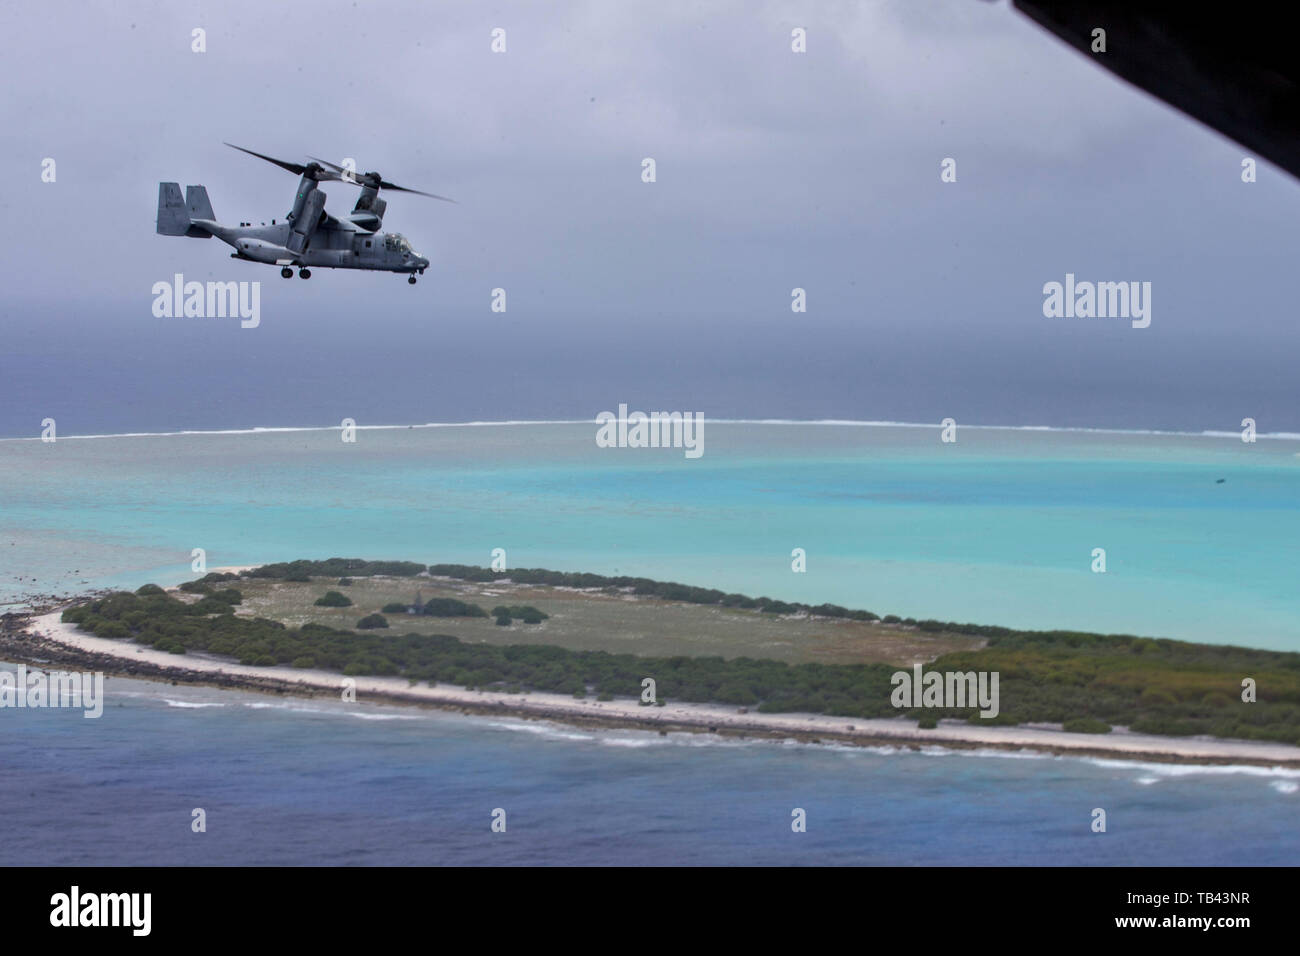 190522-M-EC058-0386 PACIFIC OCEAN (May 22, 2019) An MV-22 Osprey with Marine Medium Tiltrotor Squadron (VMM) 163 (Reinforced), 11th Marine Expeditionary Unit (MEU), flies over Wake Island. The Marines and Sailors of the 11th MEU are deployed to the U.S. 7th Fleet area of operations to support regional stability, reassure partners and allies, and maintain a presence postured to respond to any crisis ranging from humanitarian assistance to contingency operations (U.S. Marine Corps photo by Lance Cpl. Dalton S. Swanbeck) Stock Photo